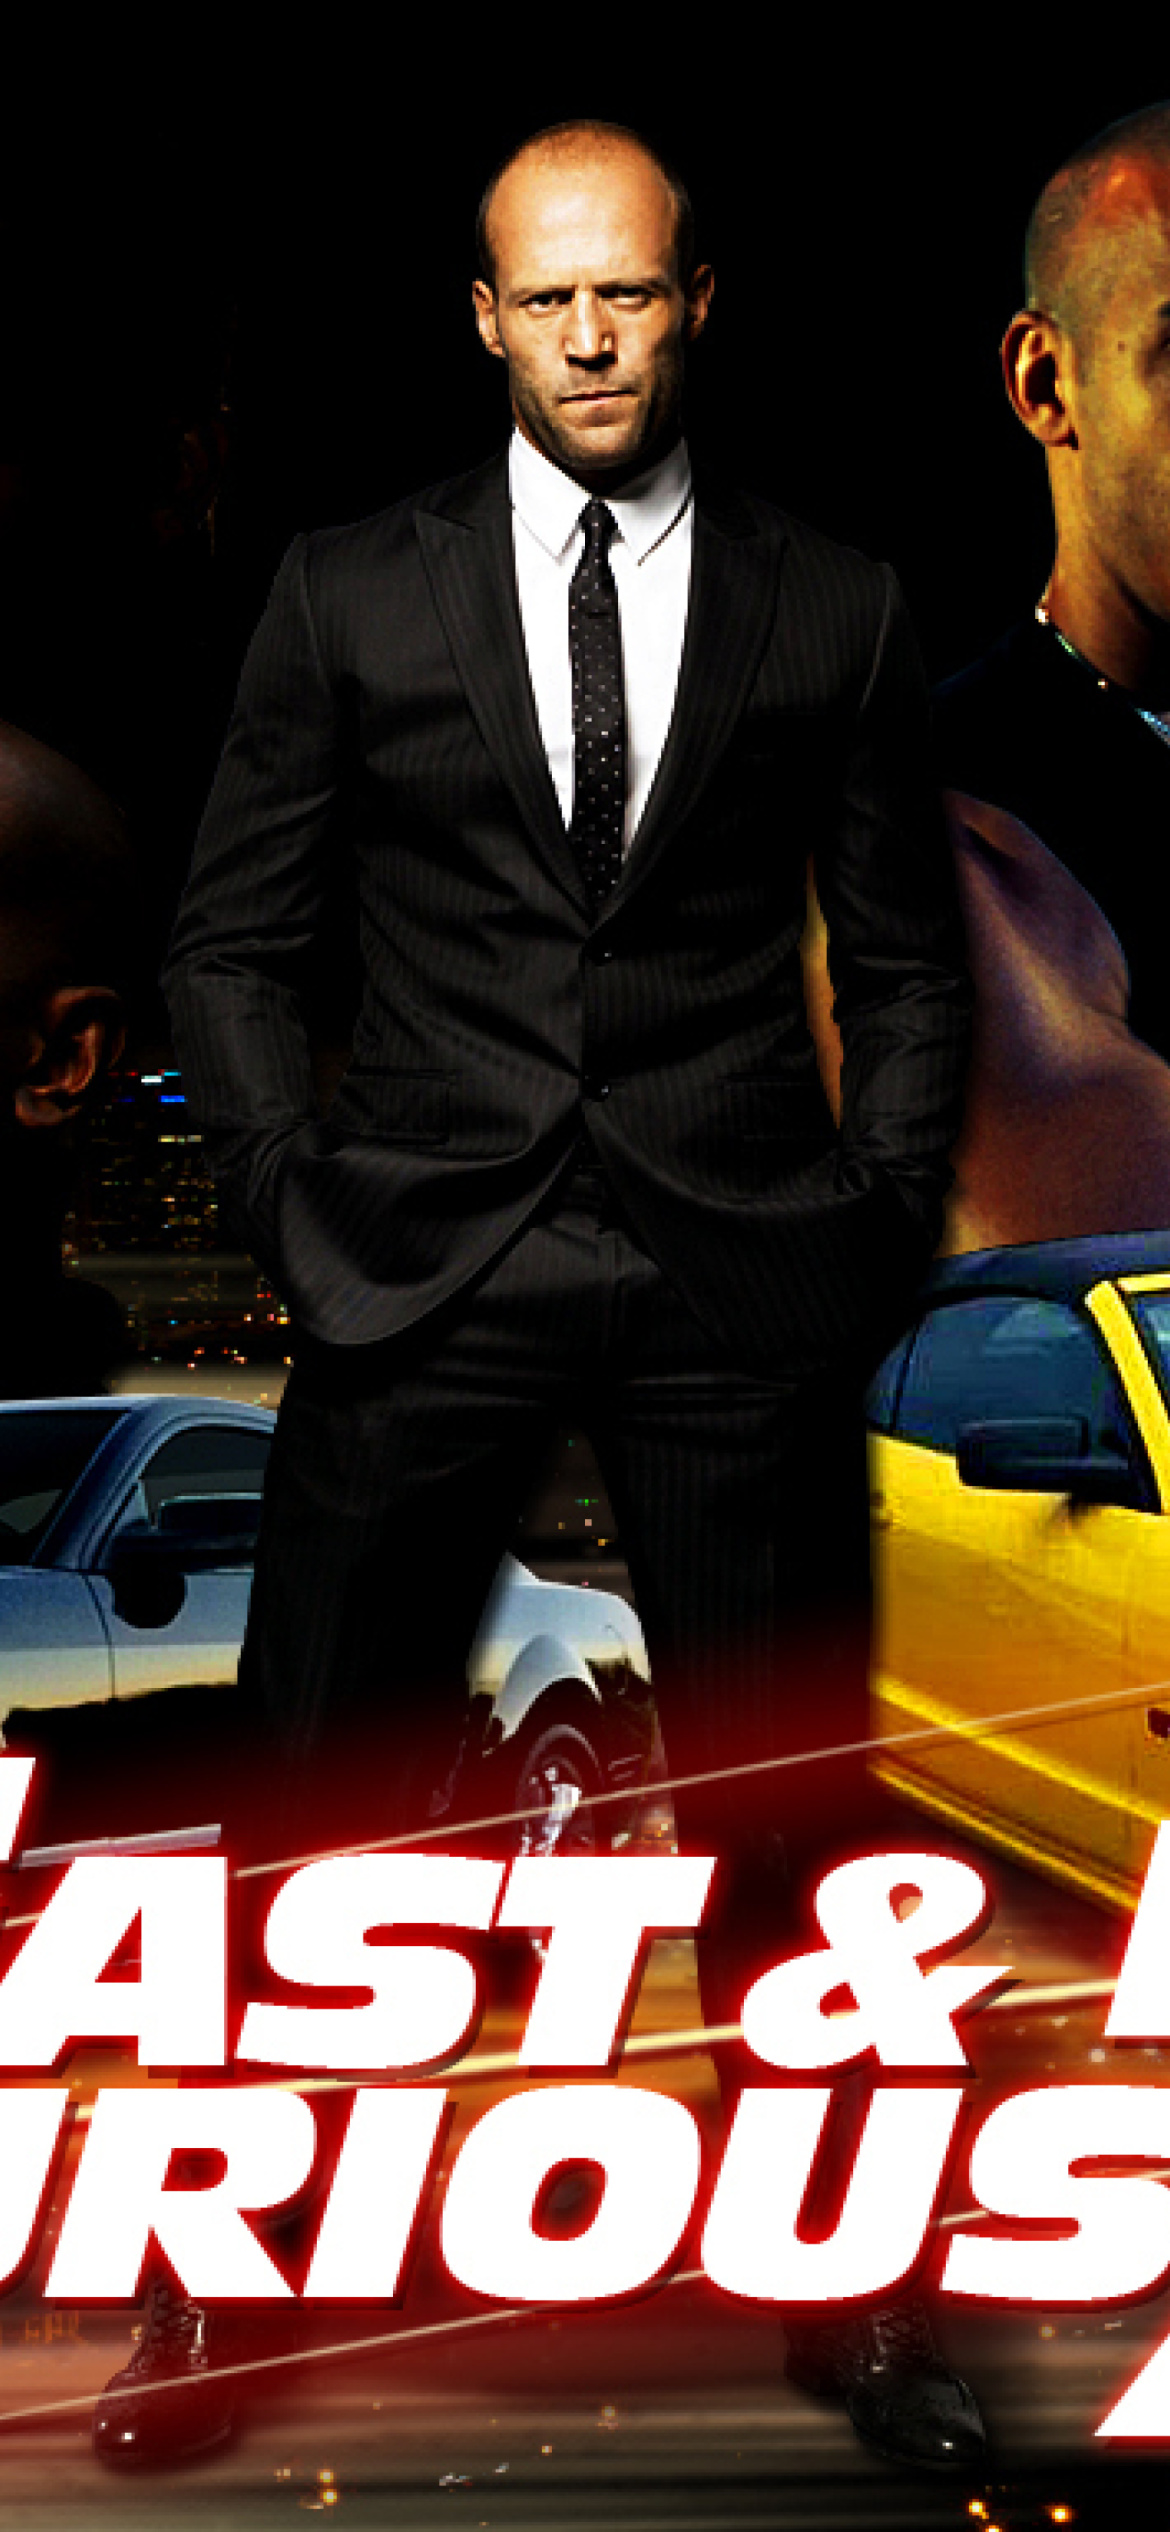 Fast and Furious 7 Movie wallpaper 1170x2532